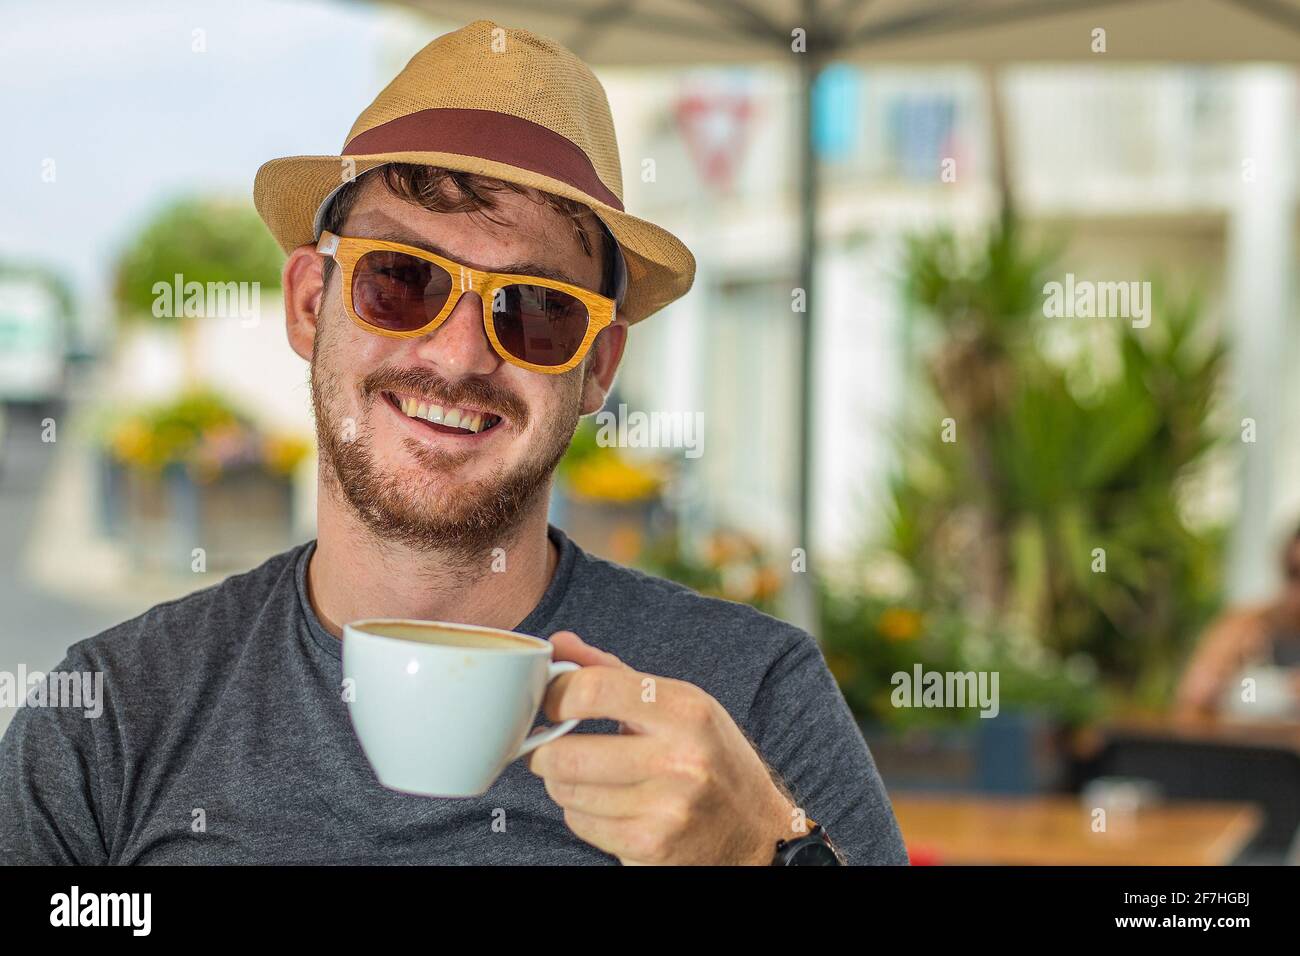 Hipster looking man with thatched hat and wooden sunglasses holding a white cup of coffee while drinking in smiling and sitting in a cafe environment. Stock Photo